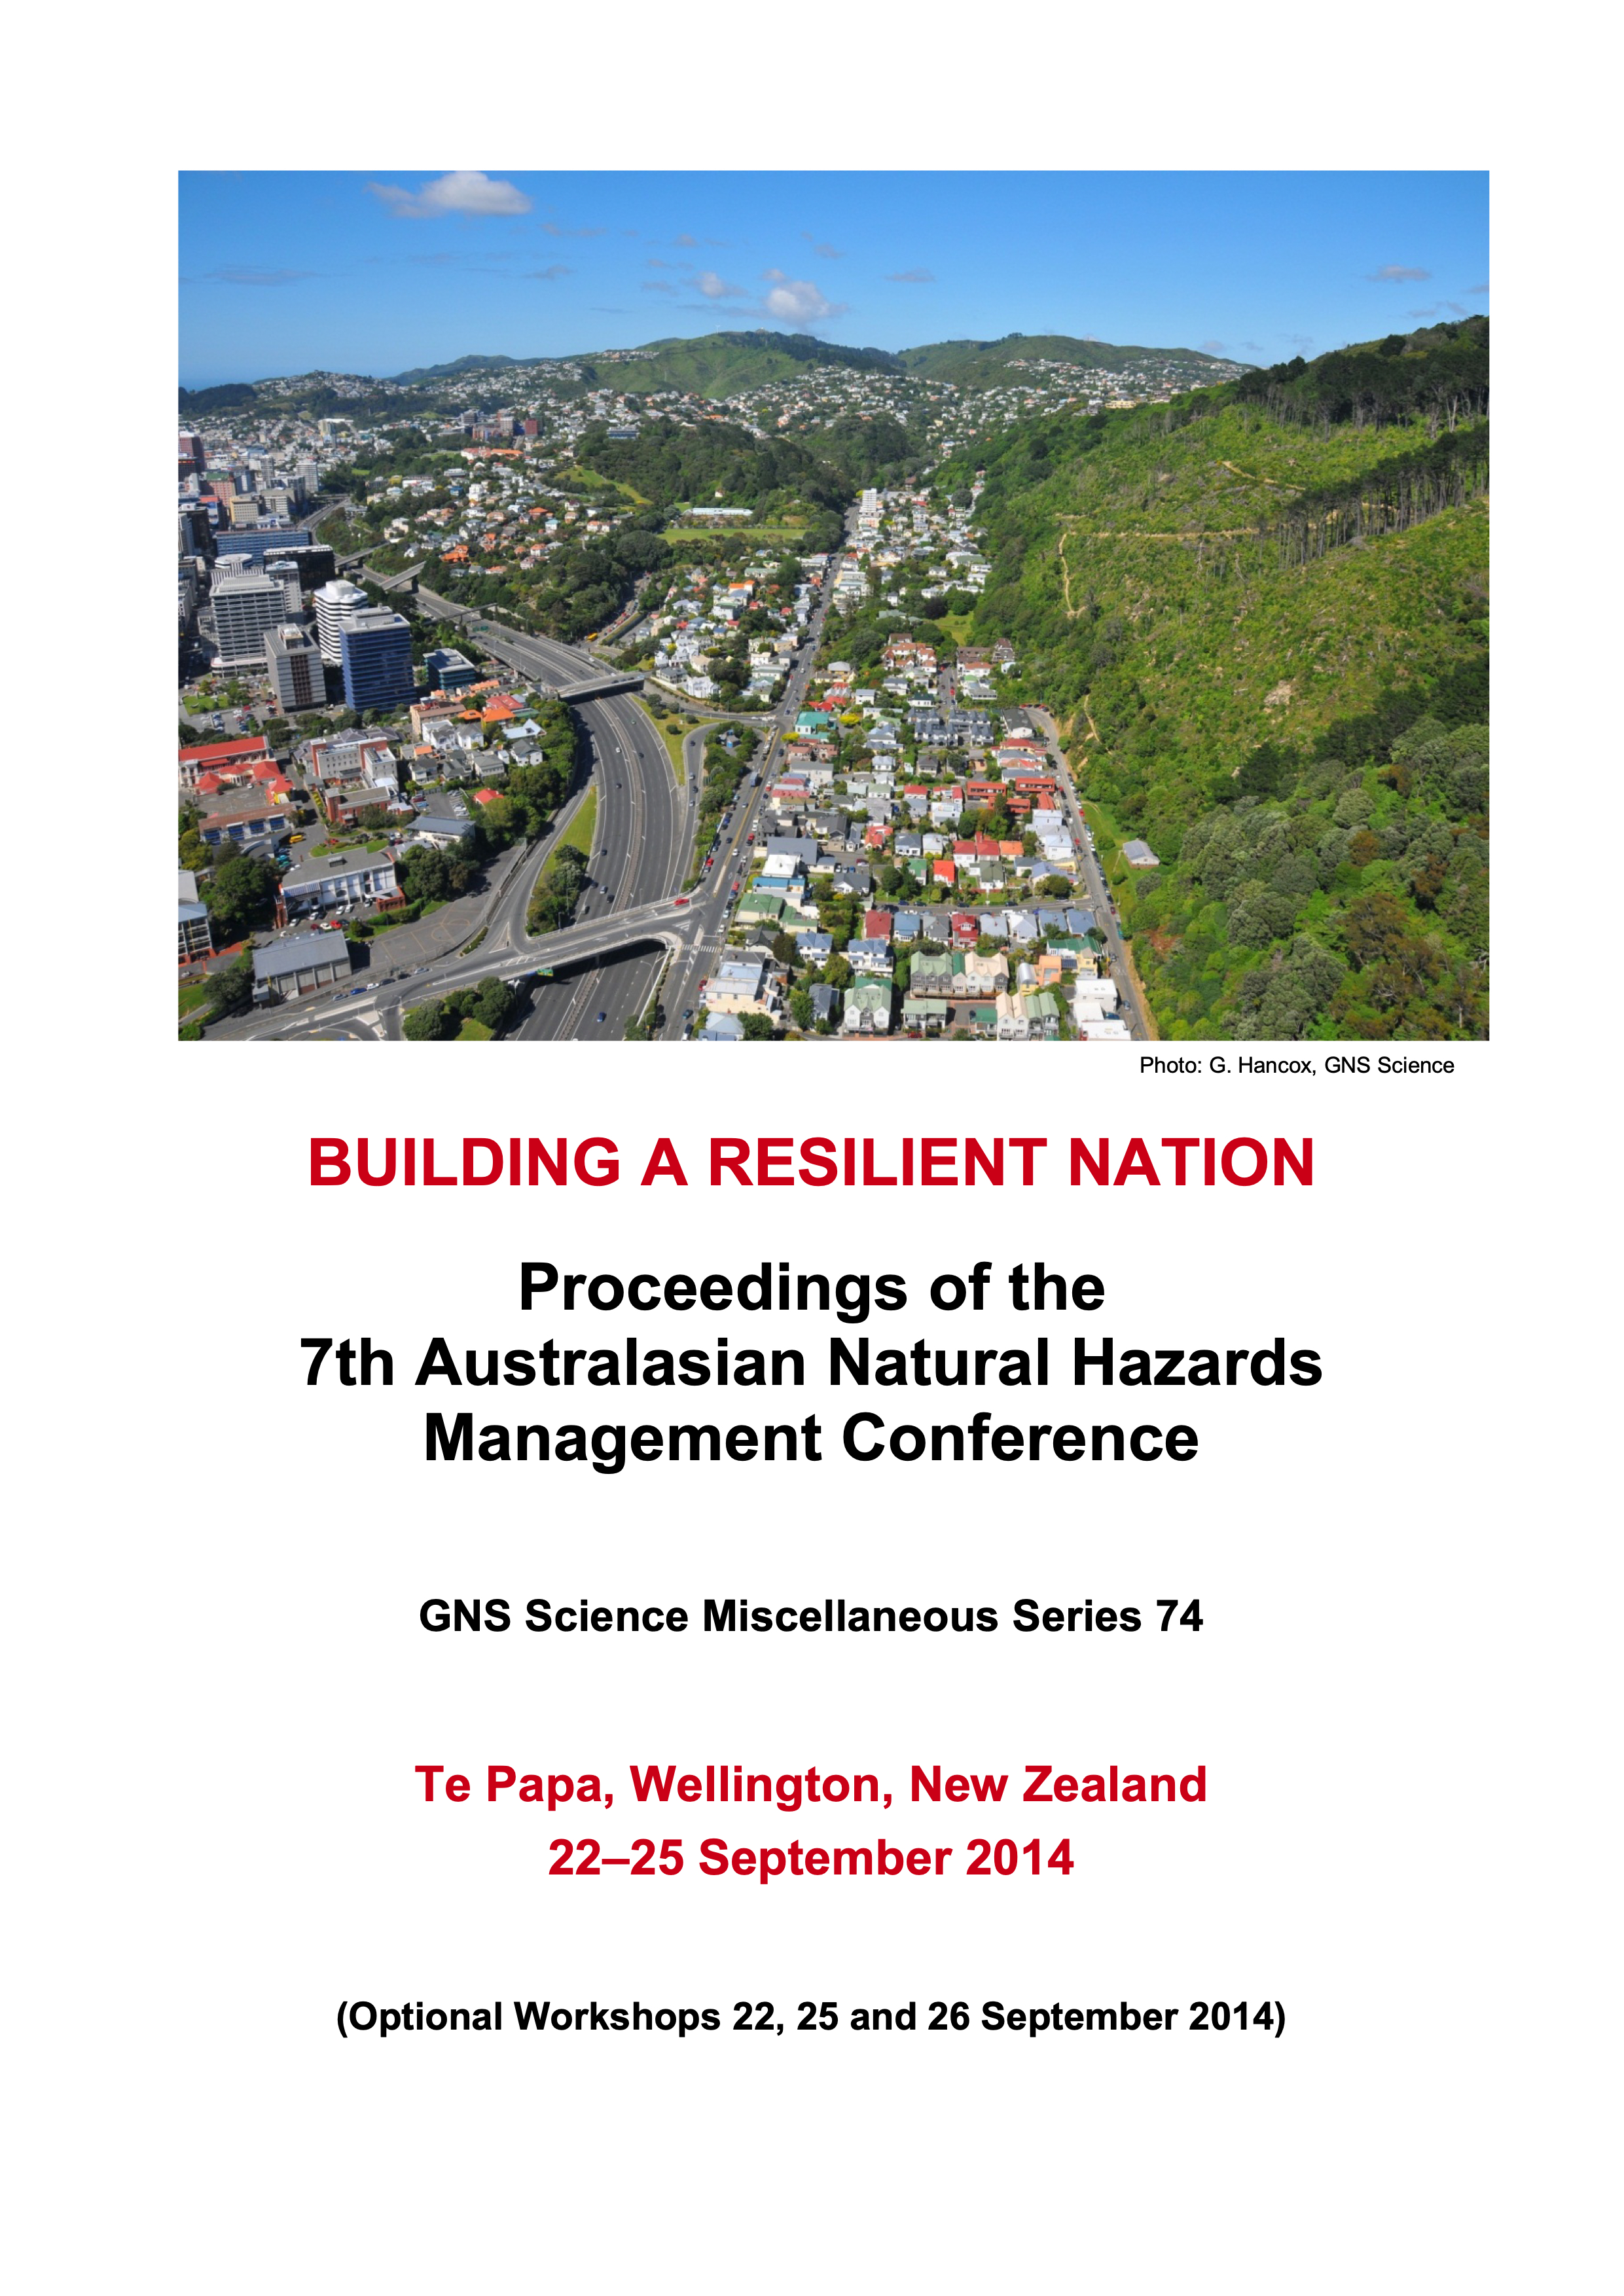 7th Australasian Natural Hazards Management Conference